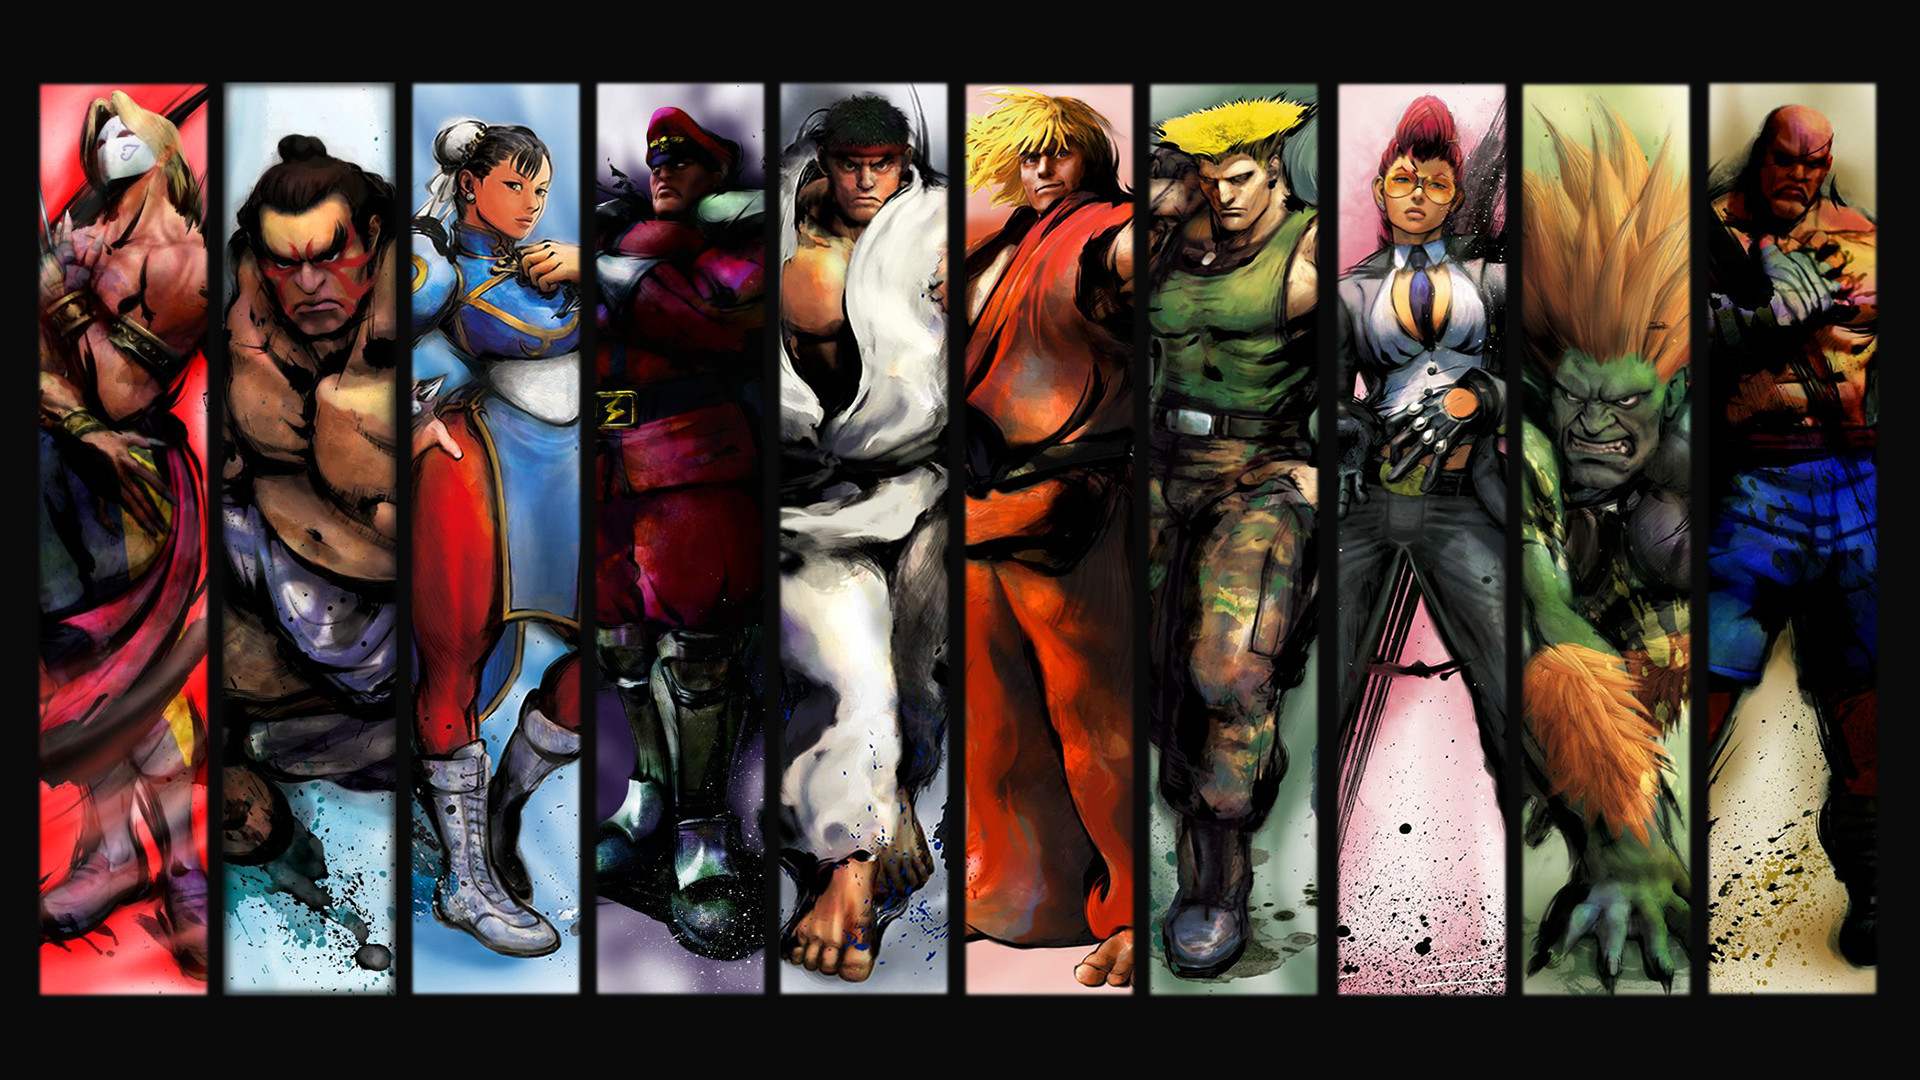 1920x1080  241 Street Fighter HD Wallpapers | Backgrounds - Wallpaper Abyss  - Page 2